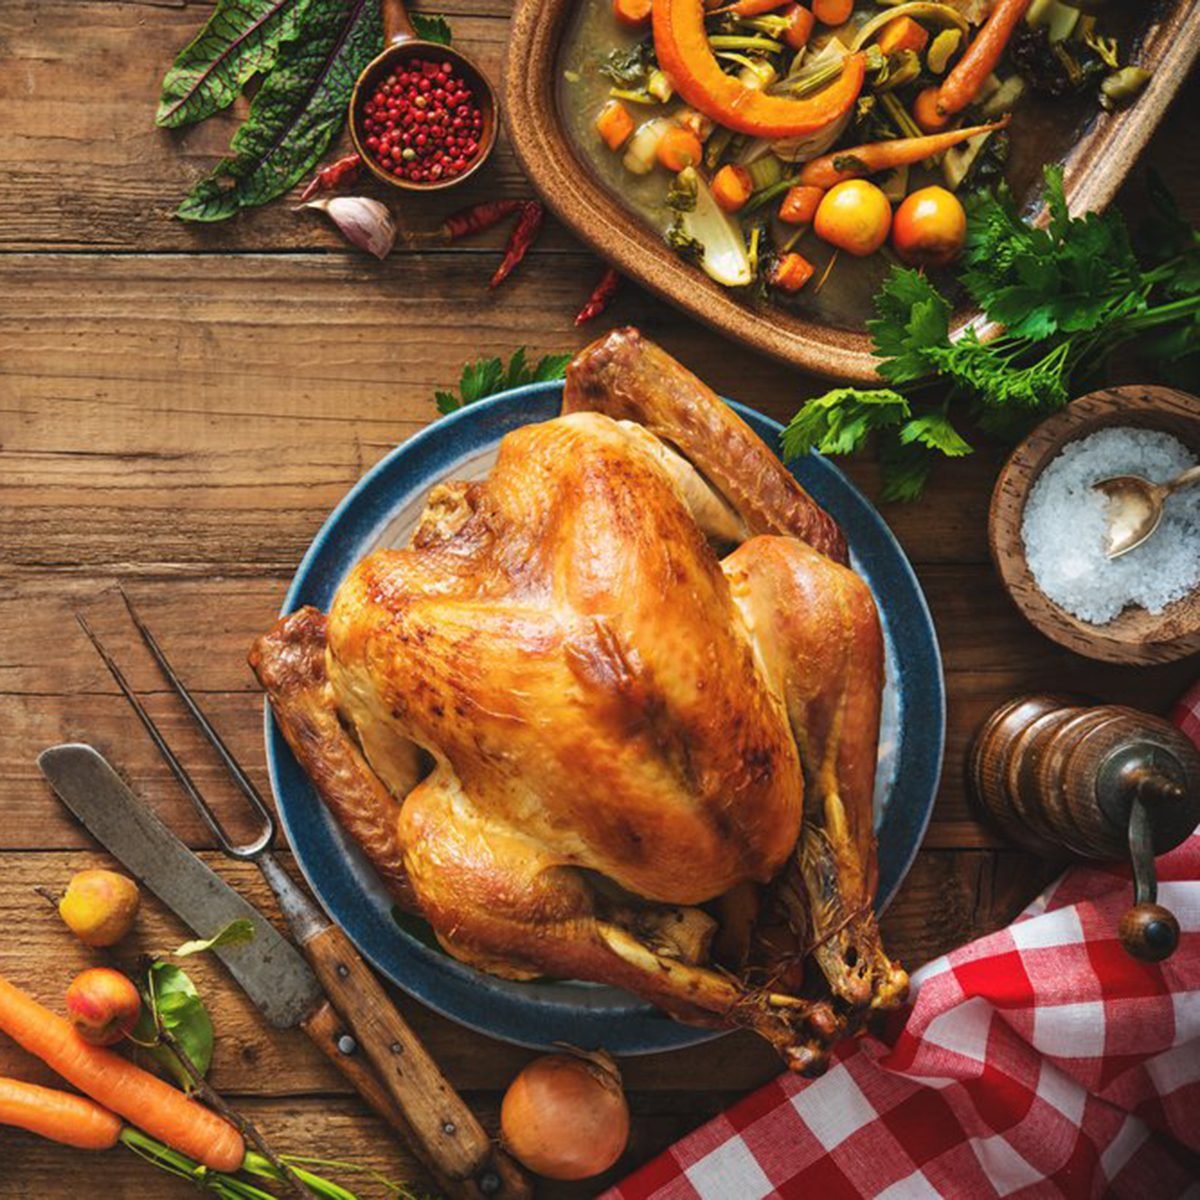 You Can Order Cooked Turkey From These Restaurants This Thanksgiving